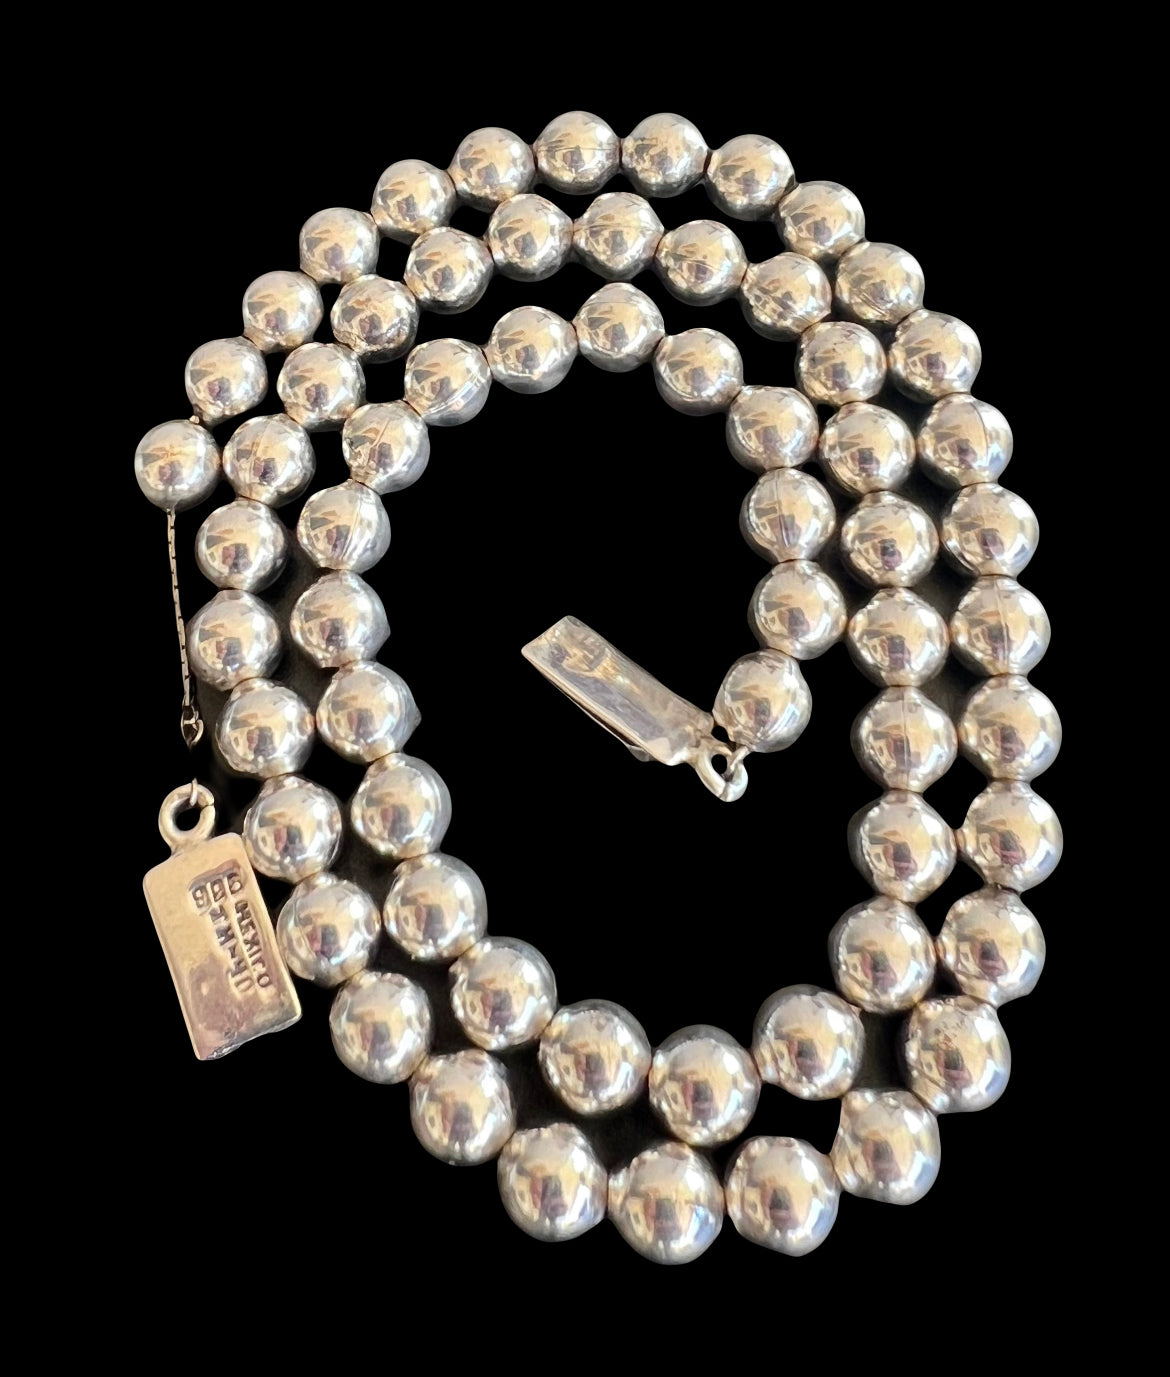 Mexican Sterling Silver Bead Pearls Necklace